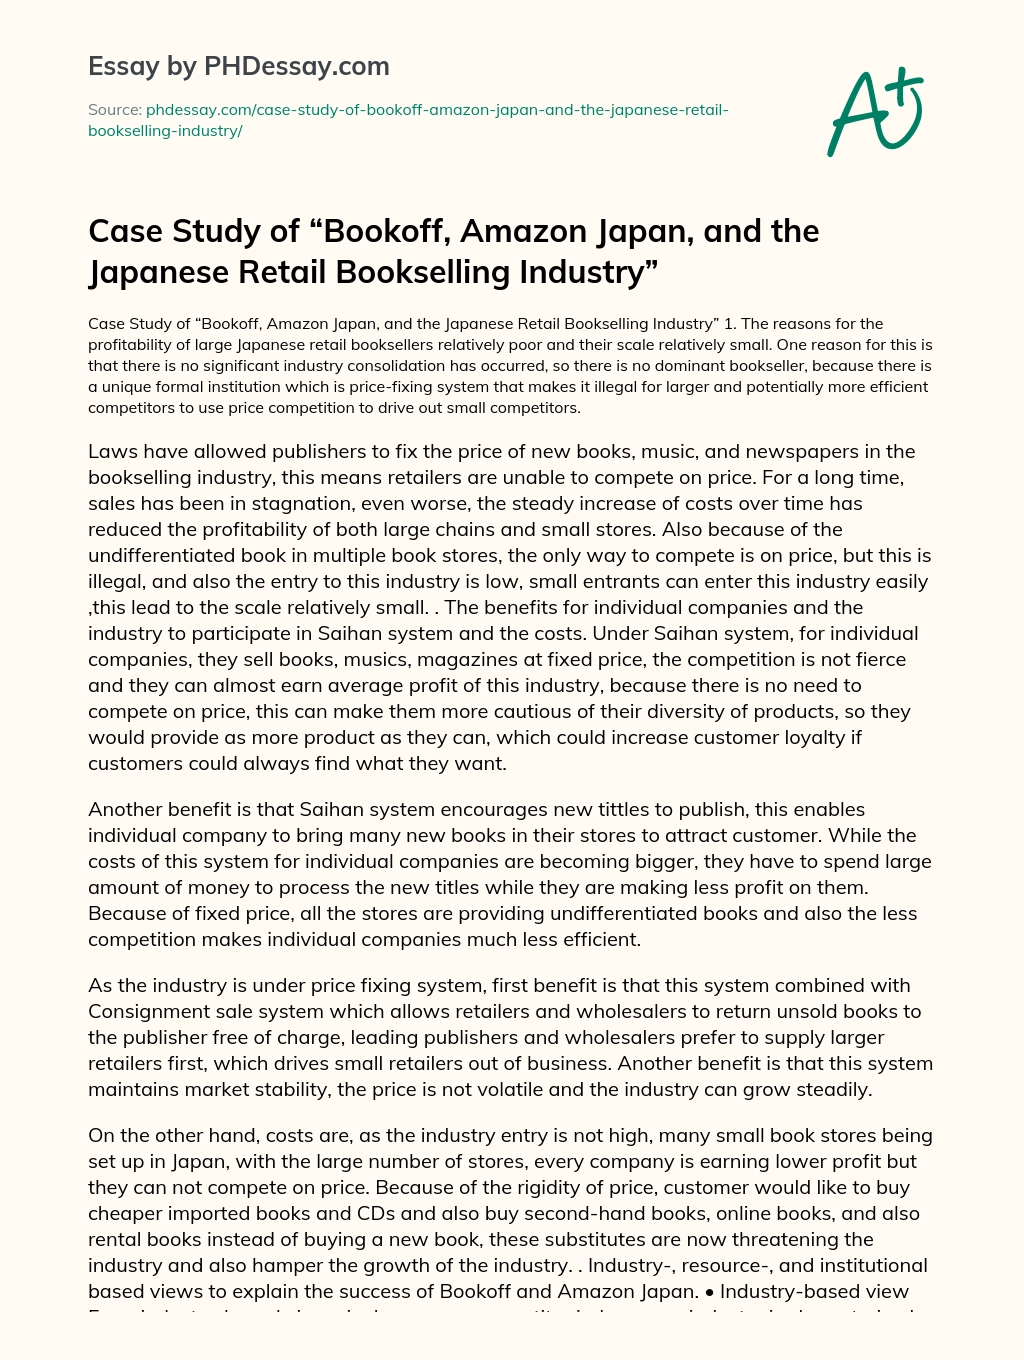 Case Study of “Bookoff, Amazon Japan, and the Japanese Retail Bookselling Industry” essay